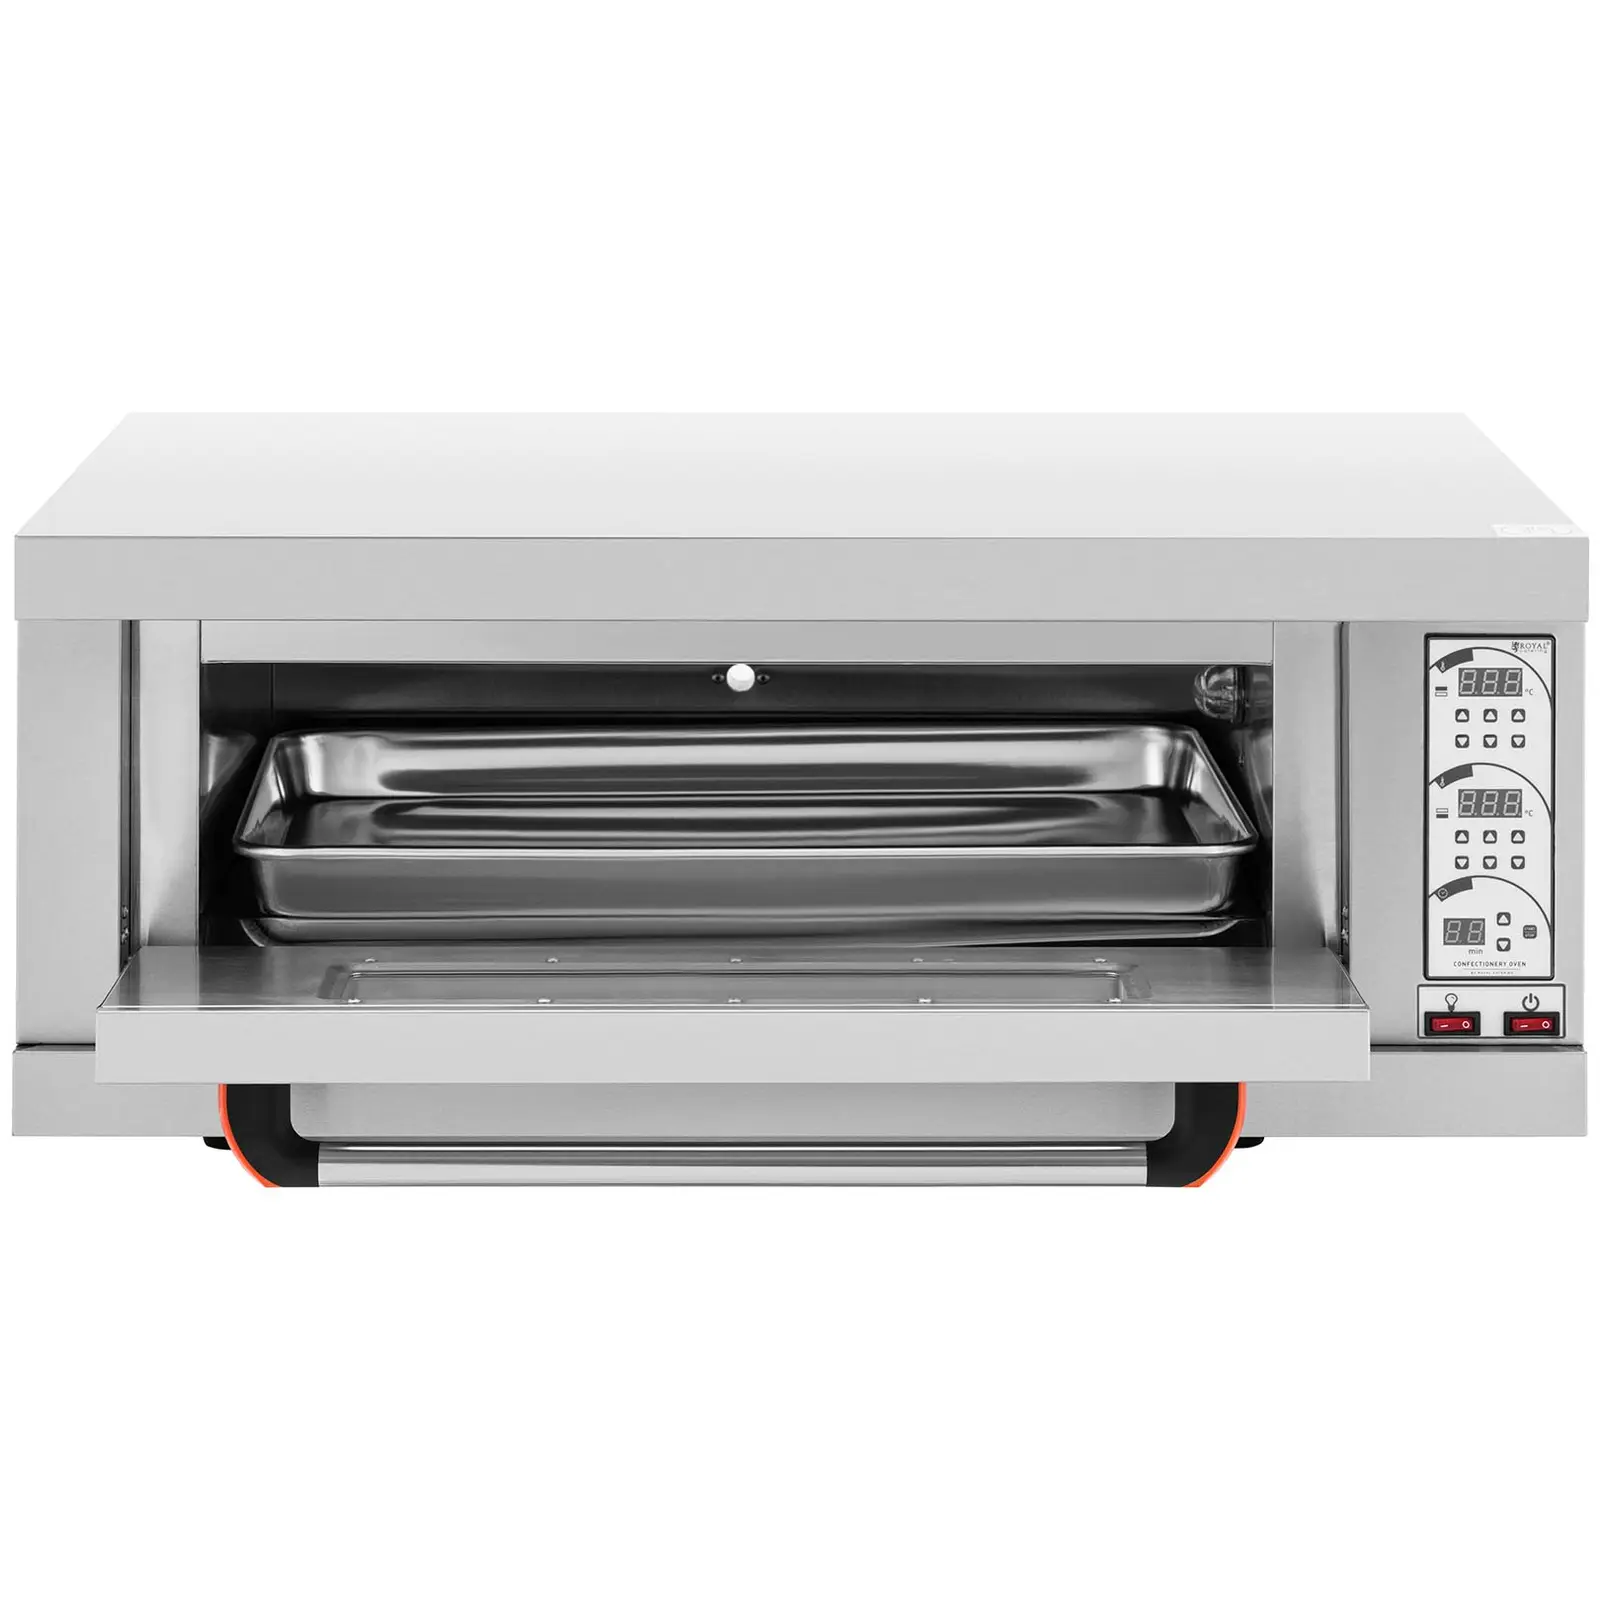 Pizza Oven - 1 chamber - 3200 W - Timer - Royal Catering - 4